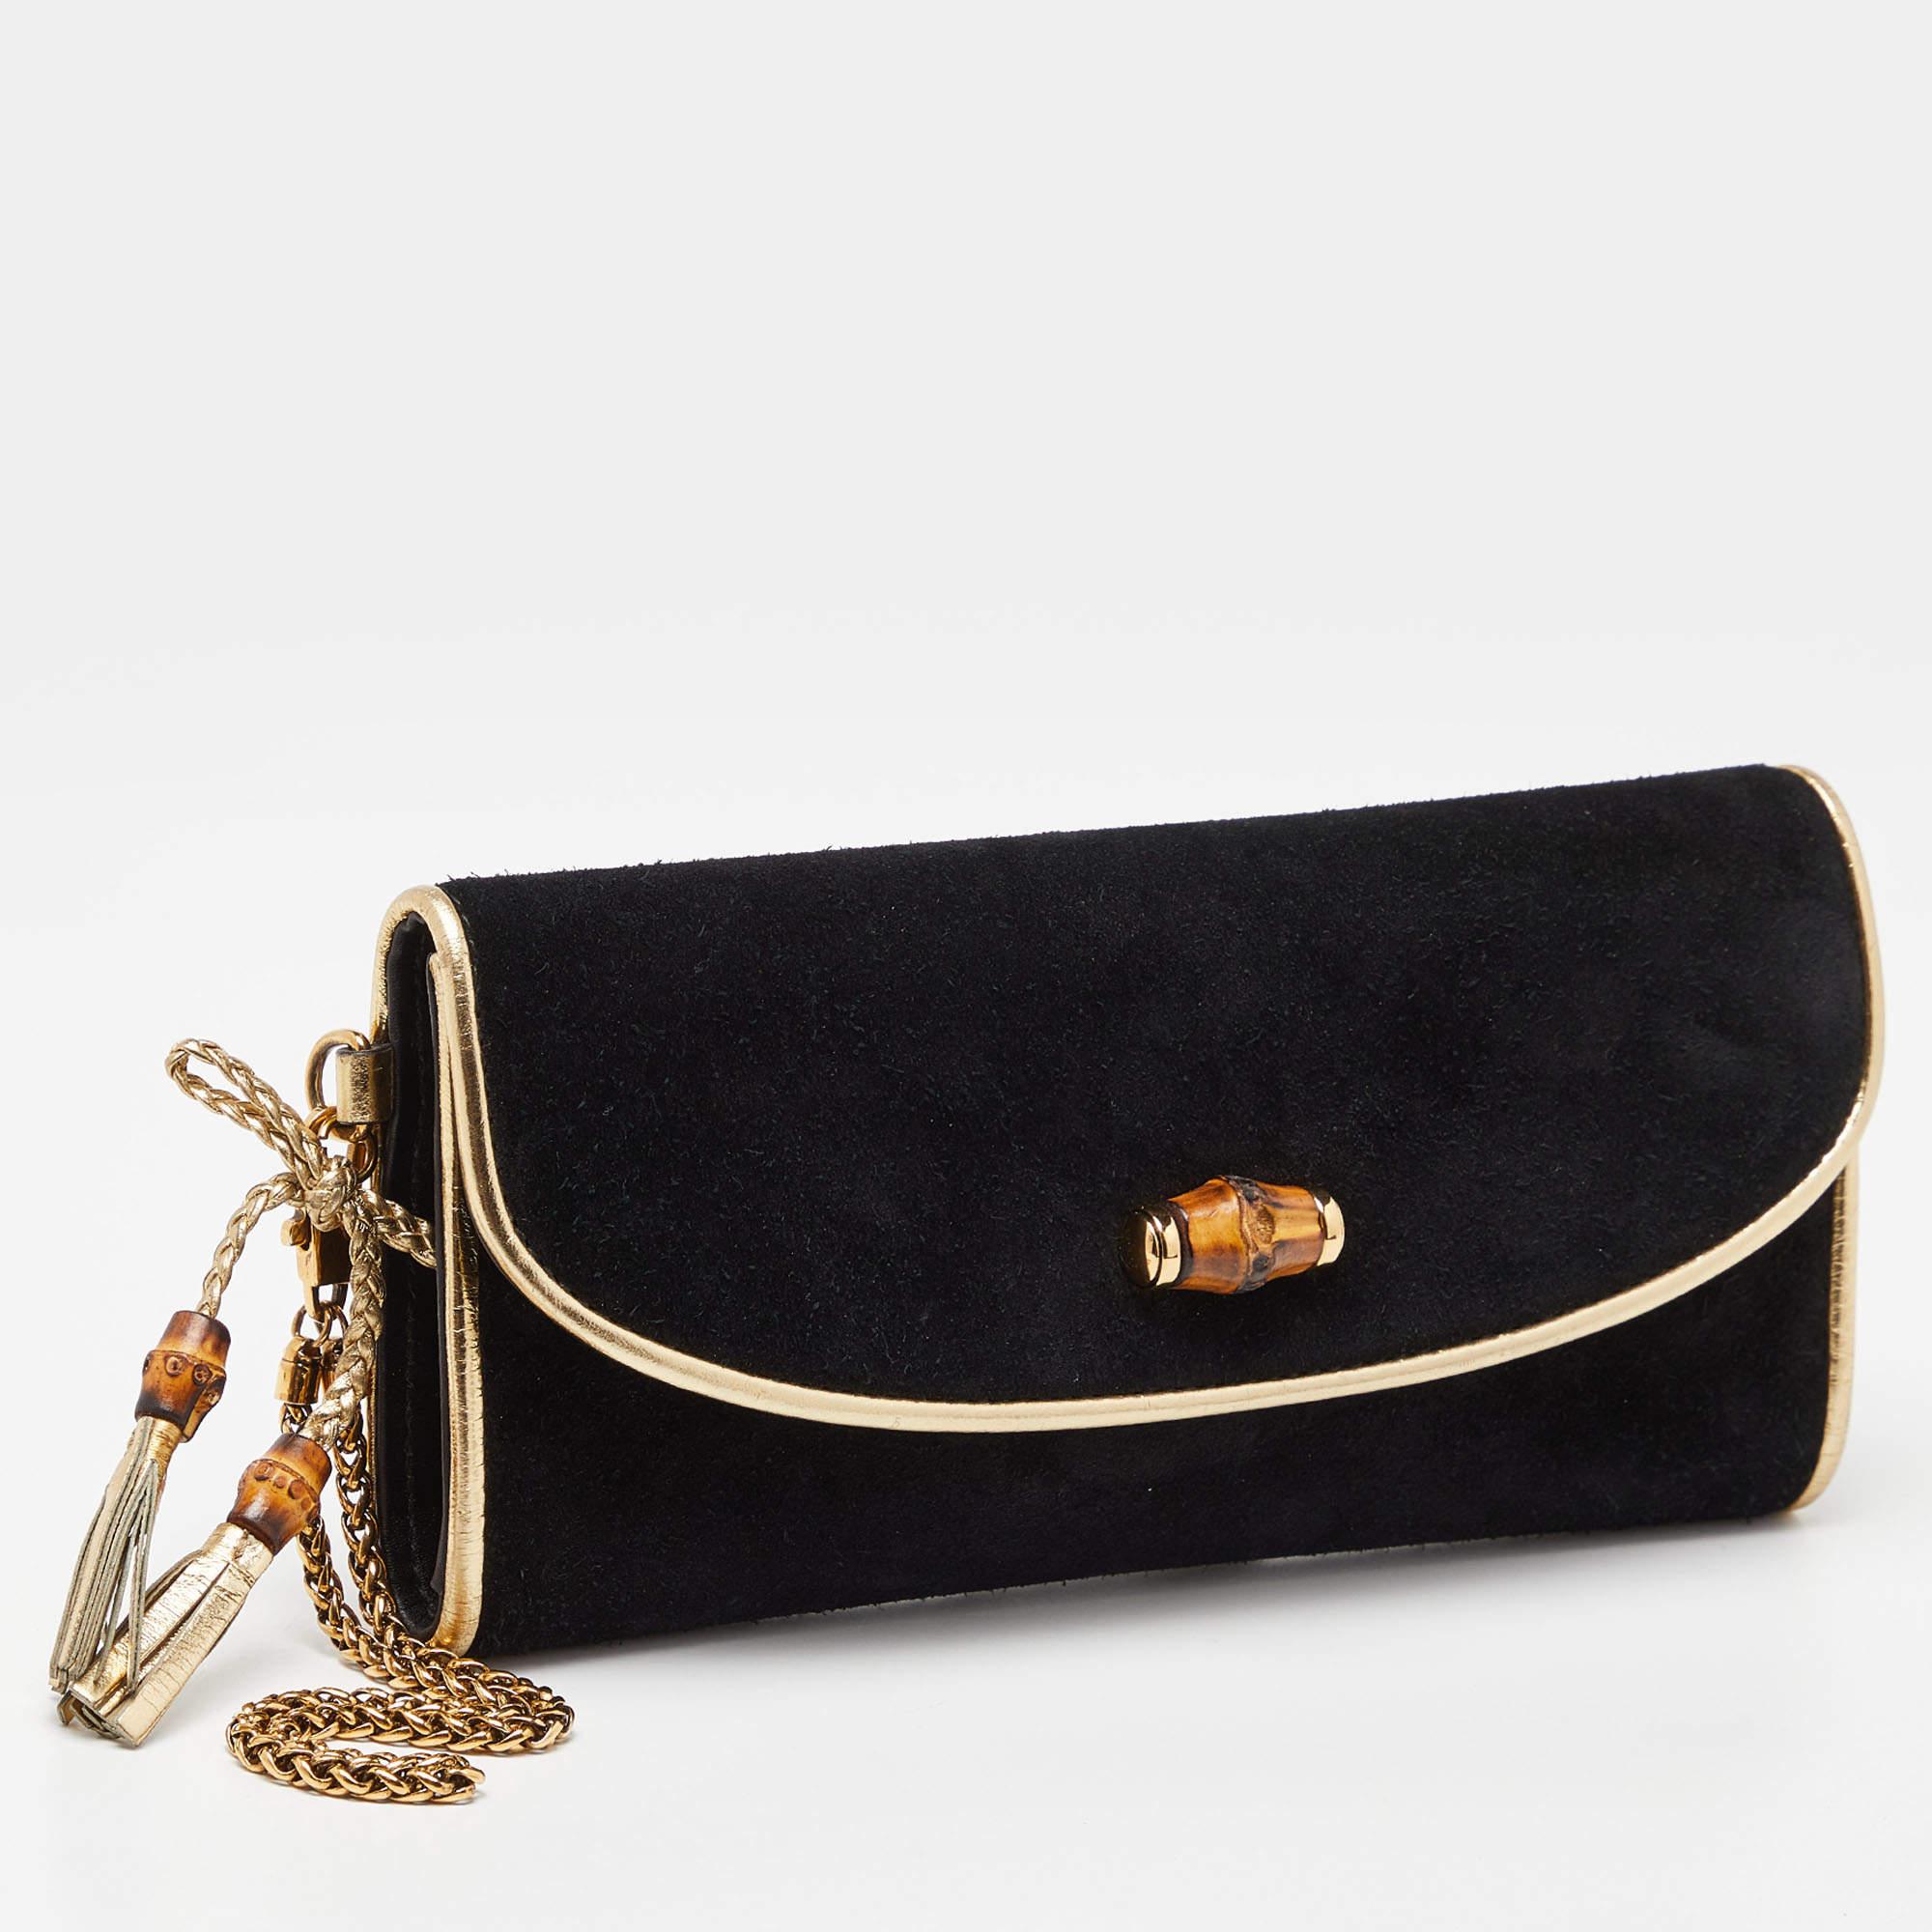 This Gucci black/gold clutch for women has the kind of design that ensures high appeal, whether held in your hand or tucked under your arm. It is a meticulously crafted piece bound to last a long time.

